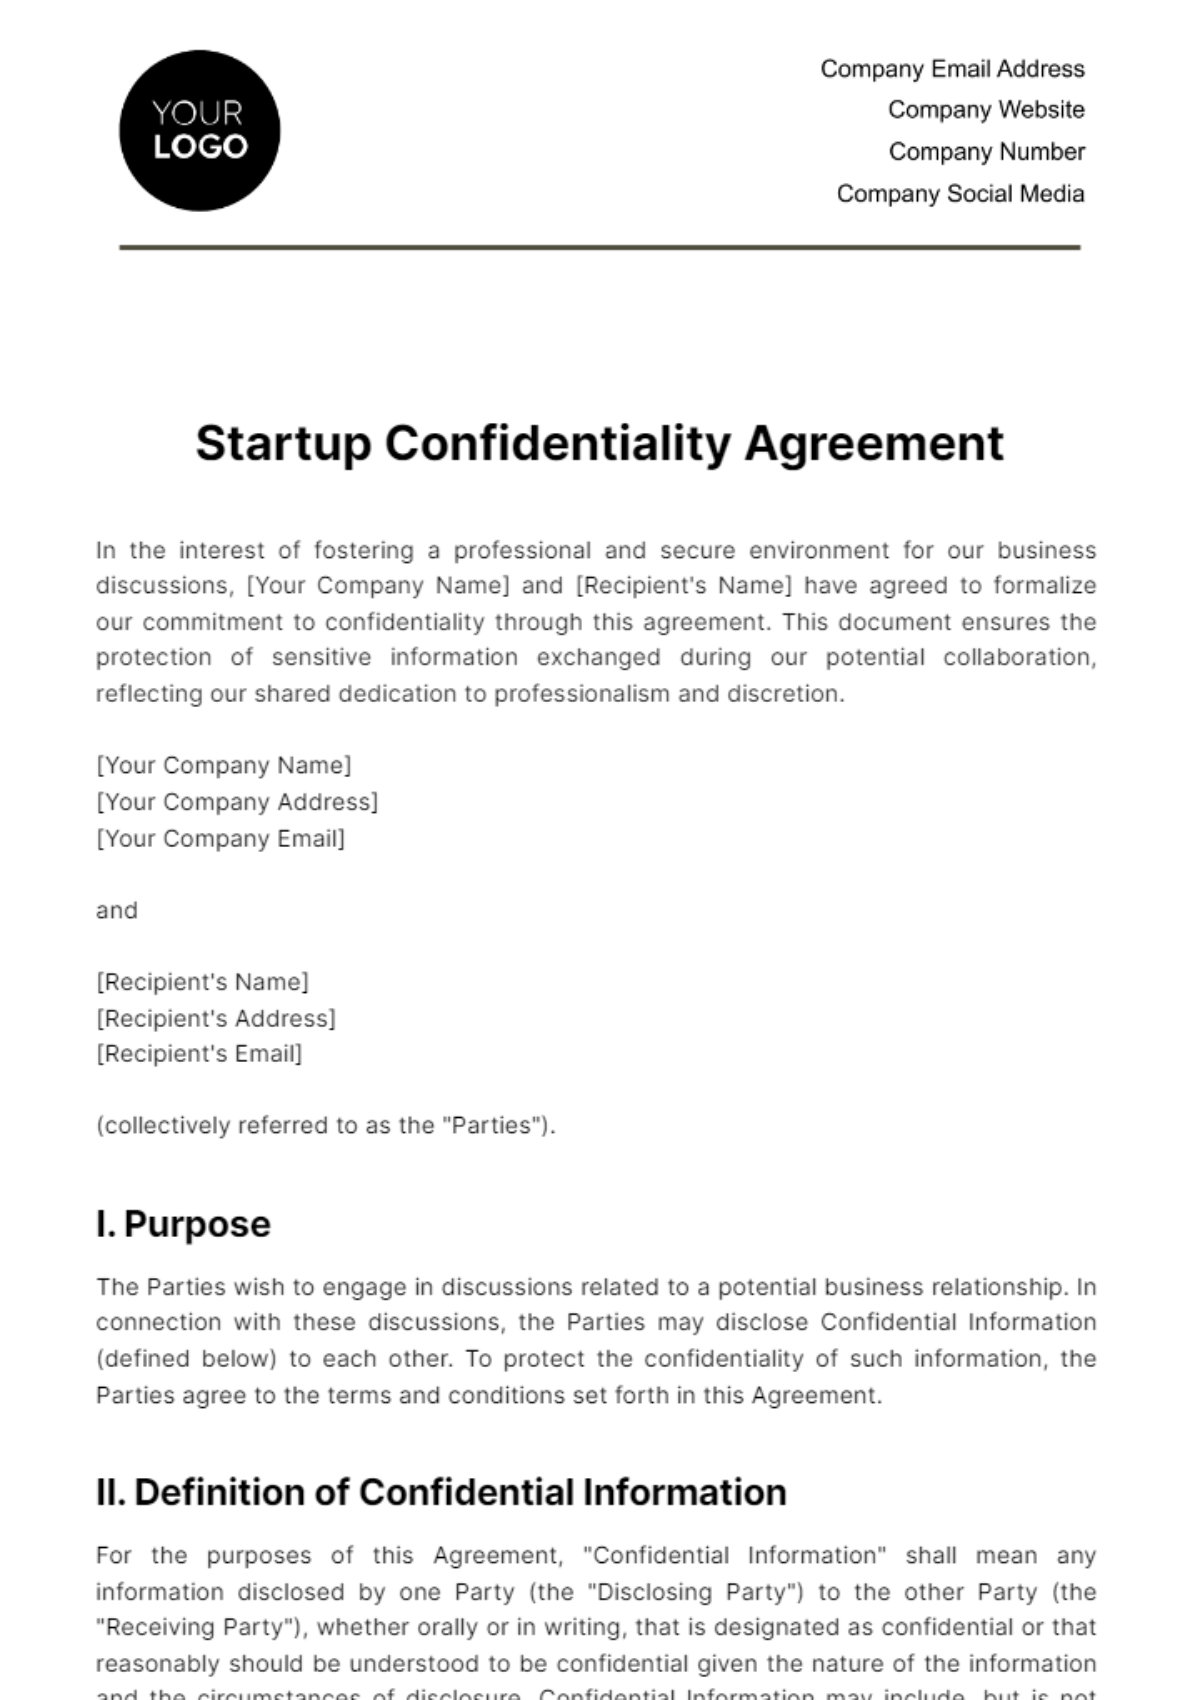 Free Startup Confidentiality Agreement Template